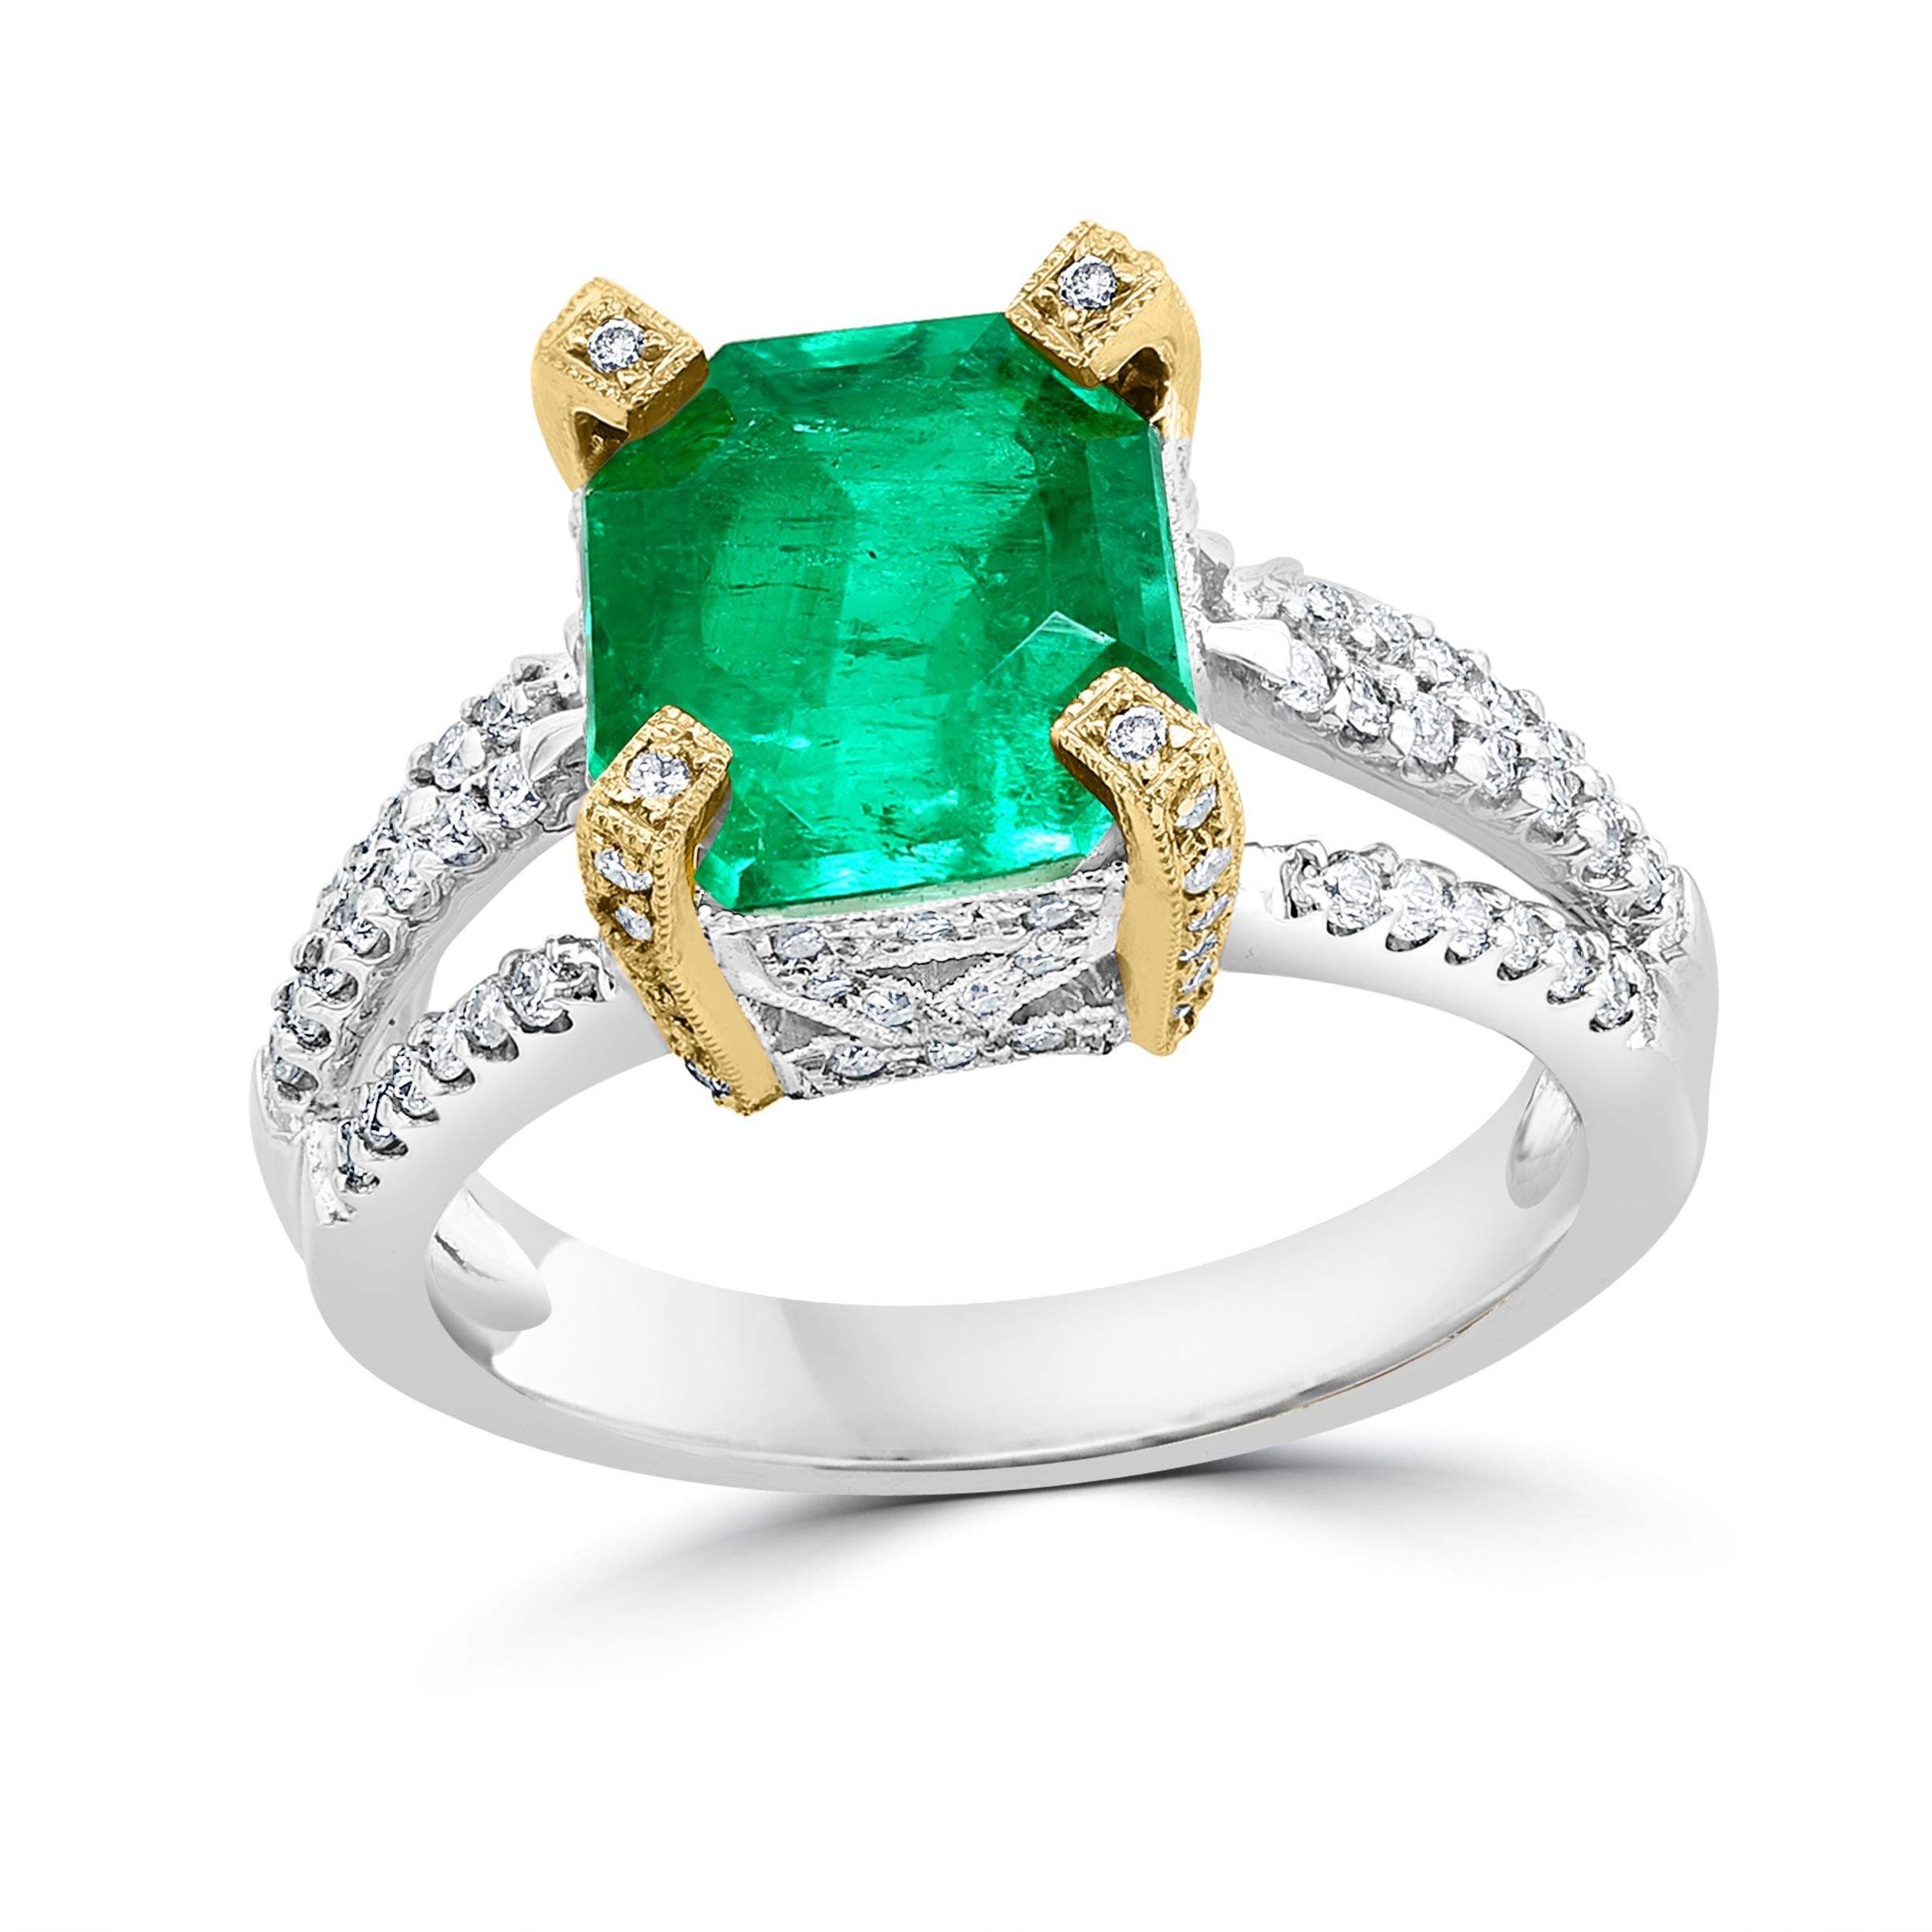 2.93 Carat Emerald Cut Colombian Emerald & 0.52Ct Diamond Ring 18K White/Y Gold For Sale 3